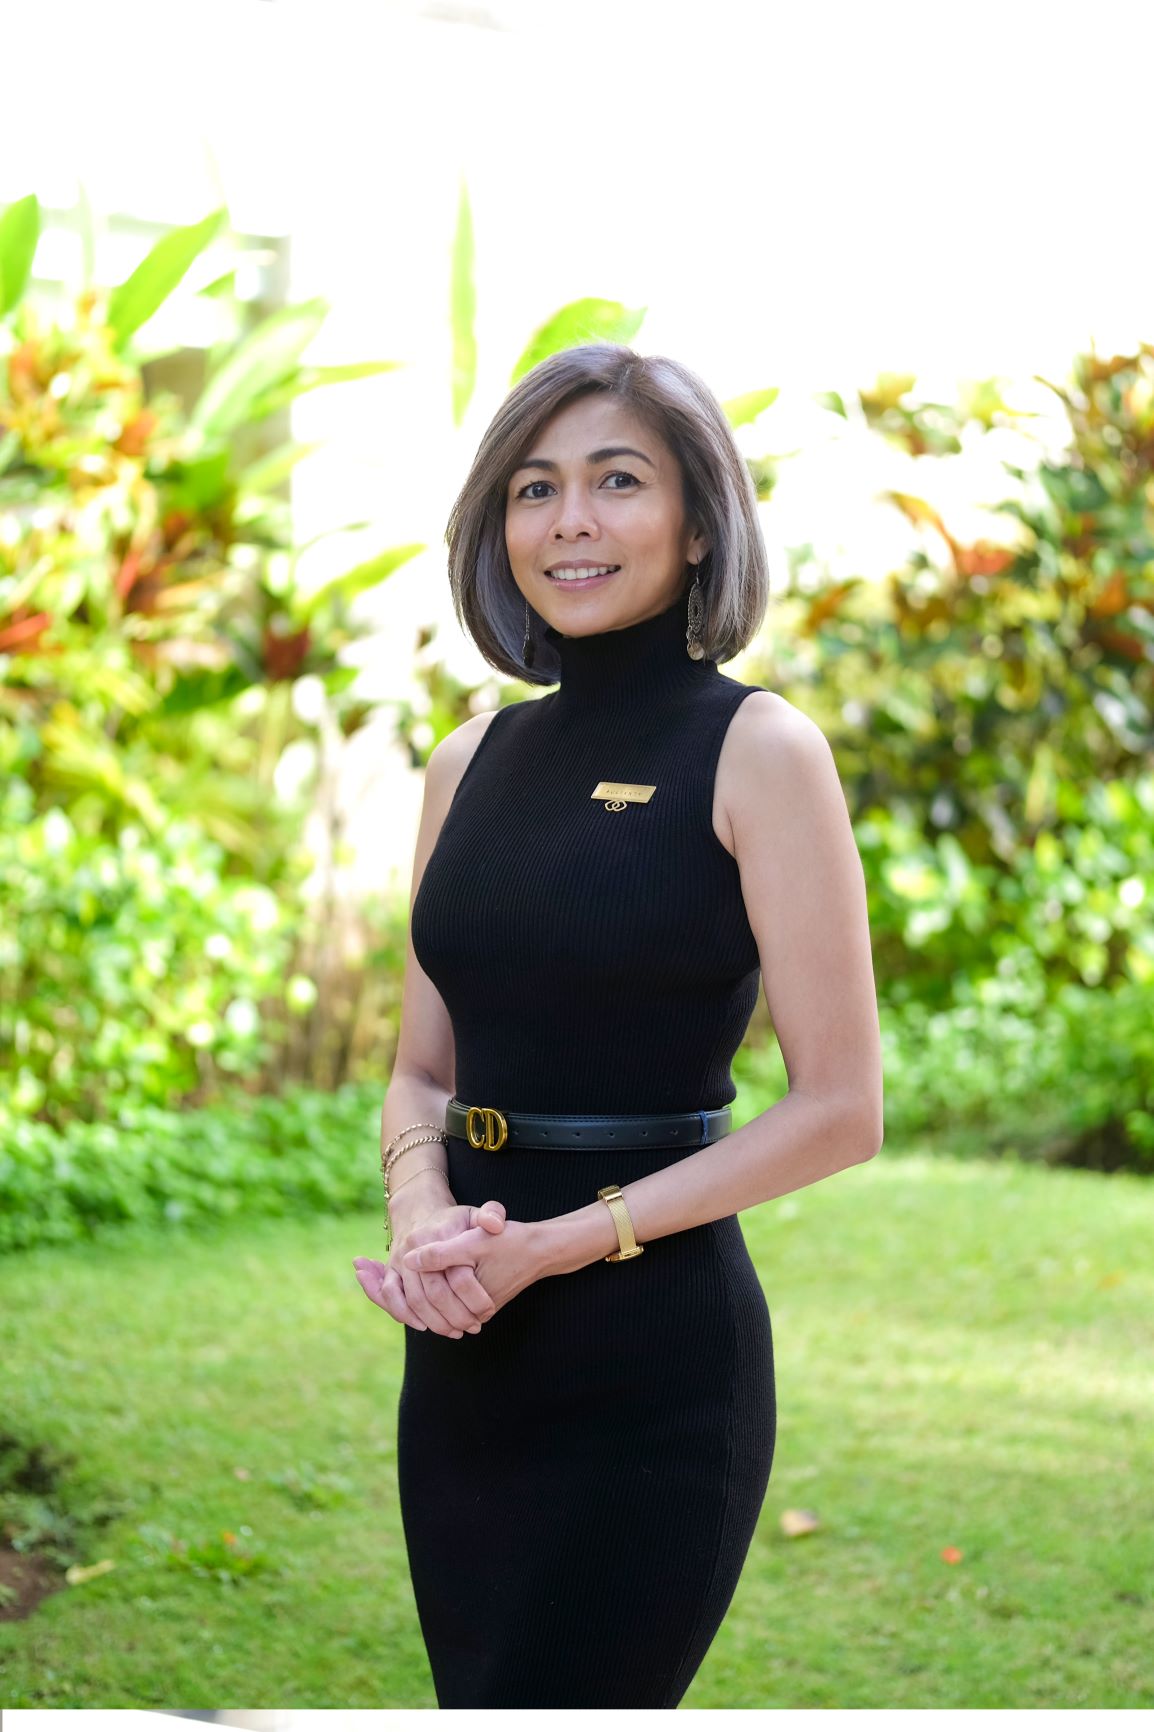 SOFITEL BALI NUSA DUA BEACH RESORT BOLSTERSMARKETING COMMUNICATIONS AND PR WITH THE NEW APPOINTMENT